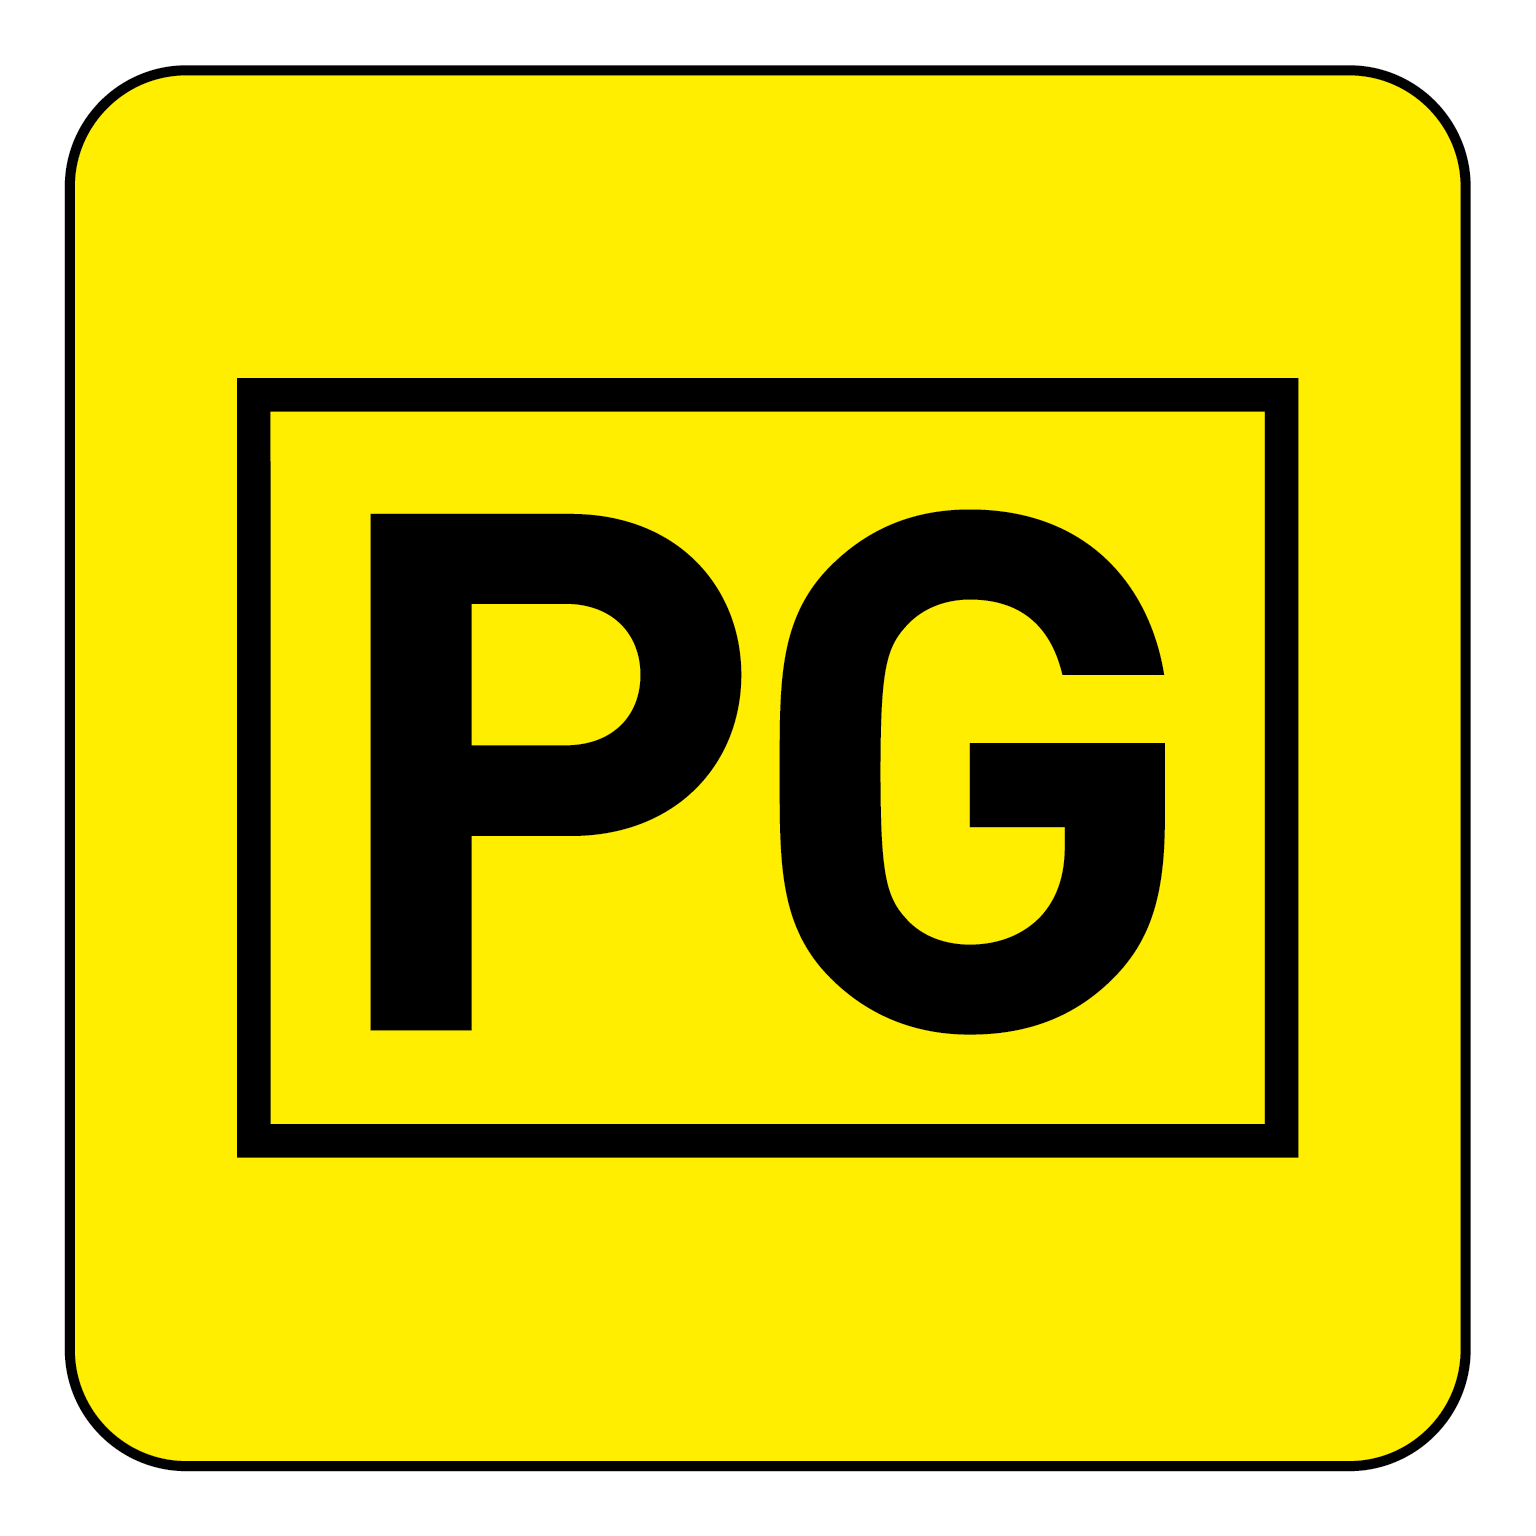 Rated PG by Australian Classification Board (ACB)